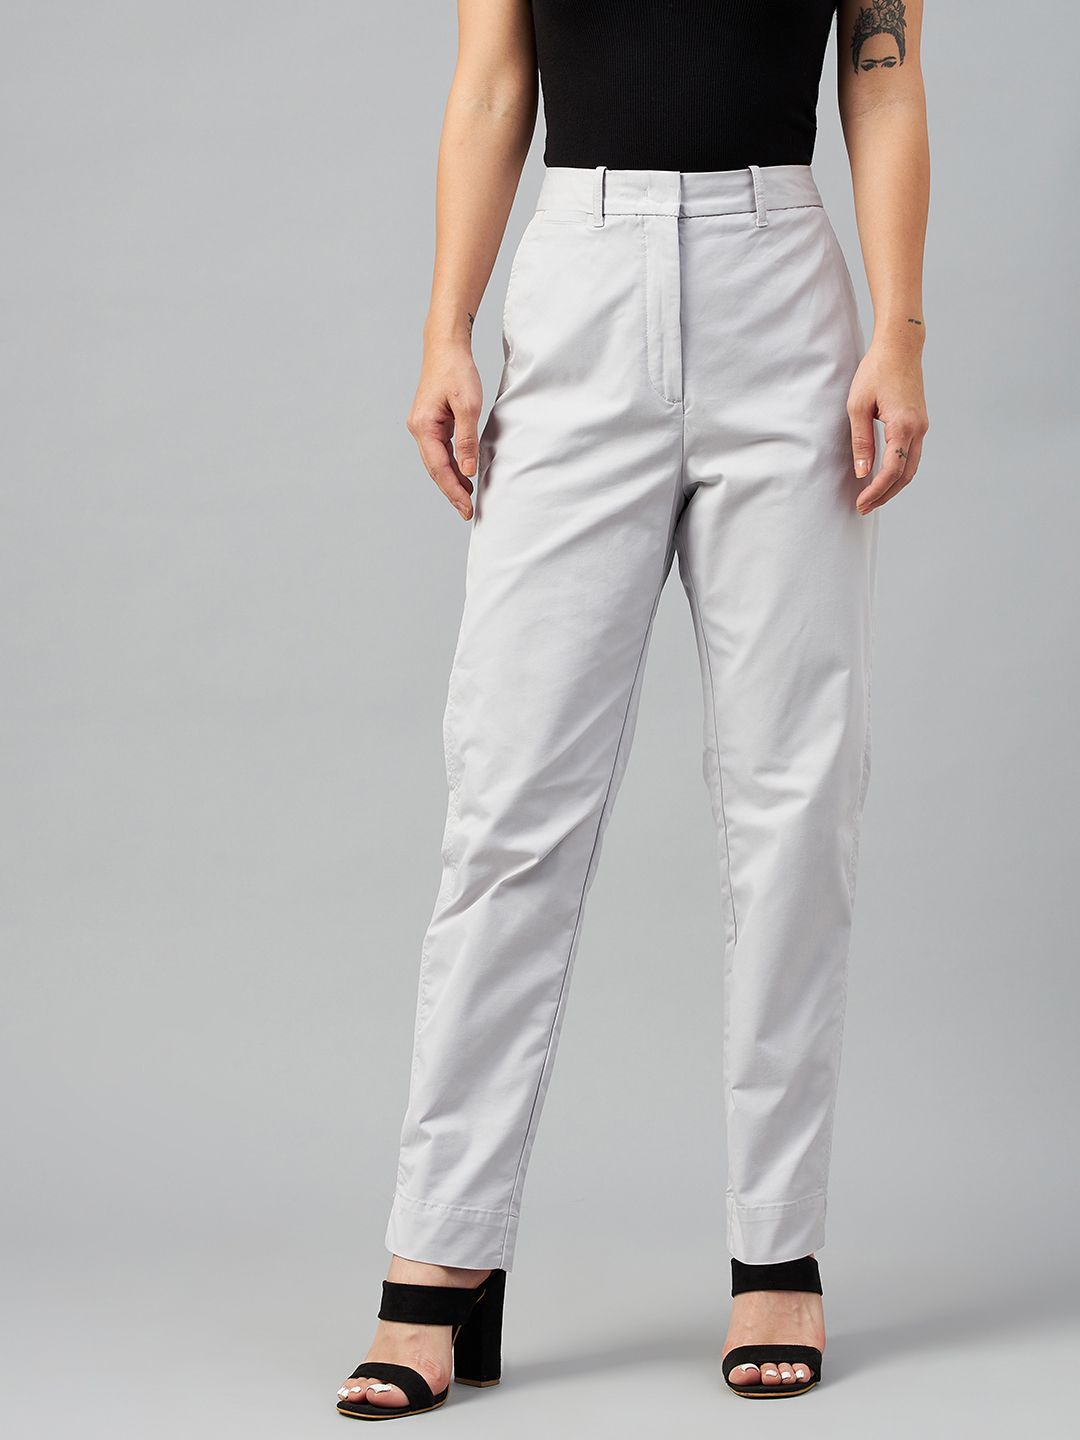 Marks & Spencer Women Grey High-Rise Chinos Trousers Price in India